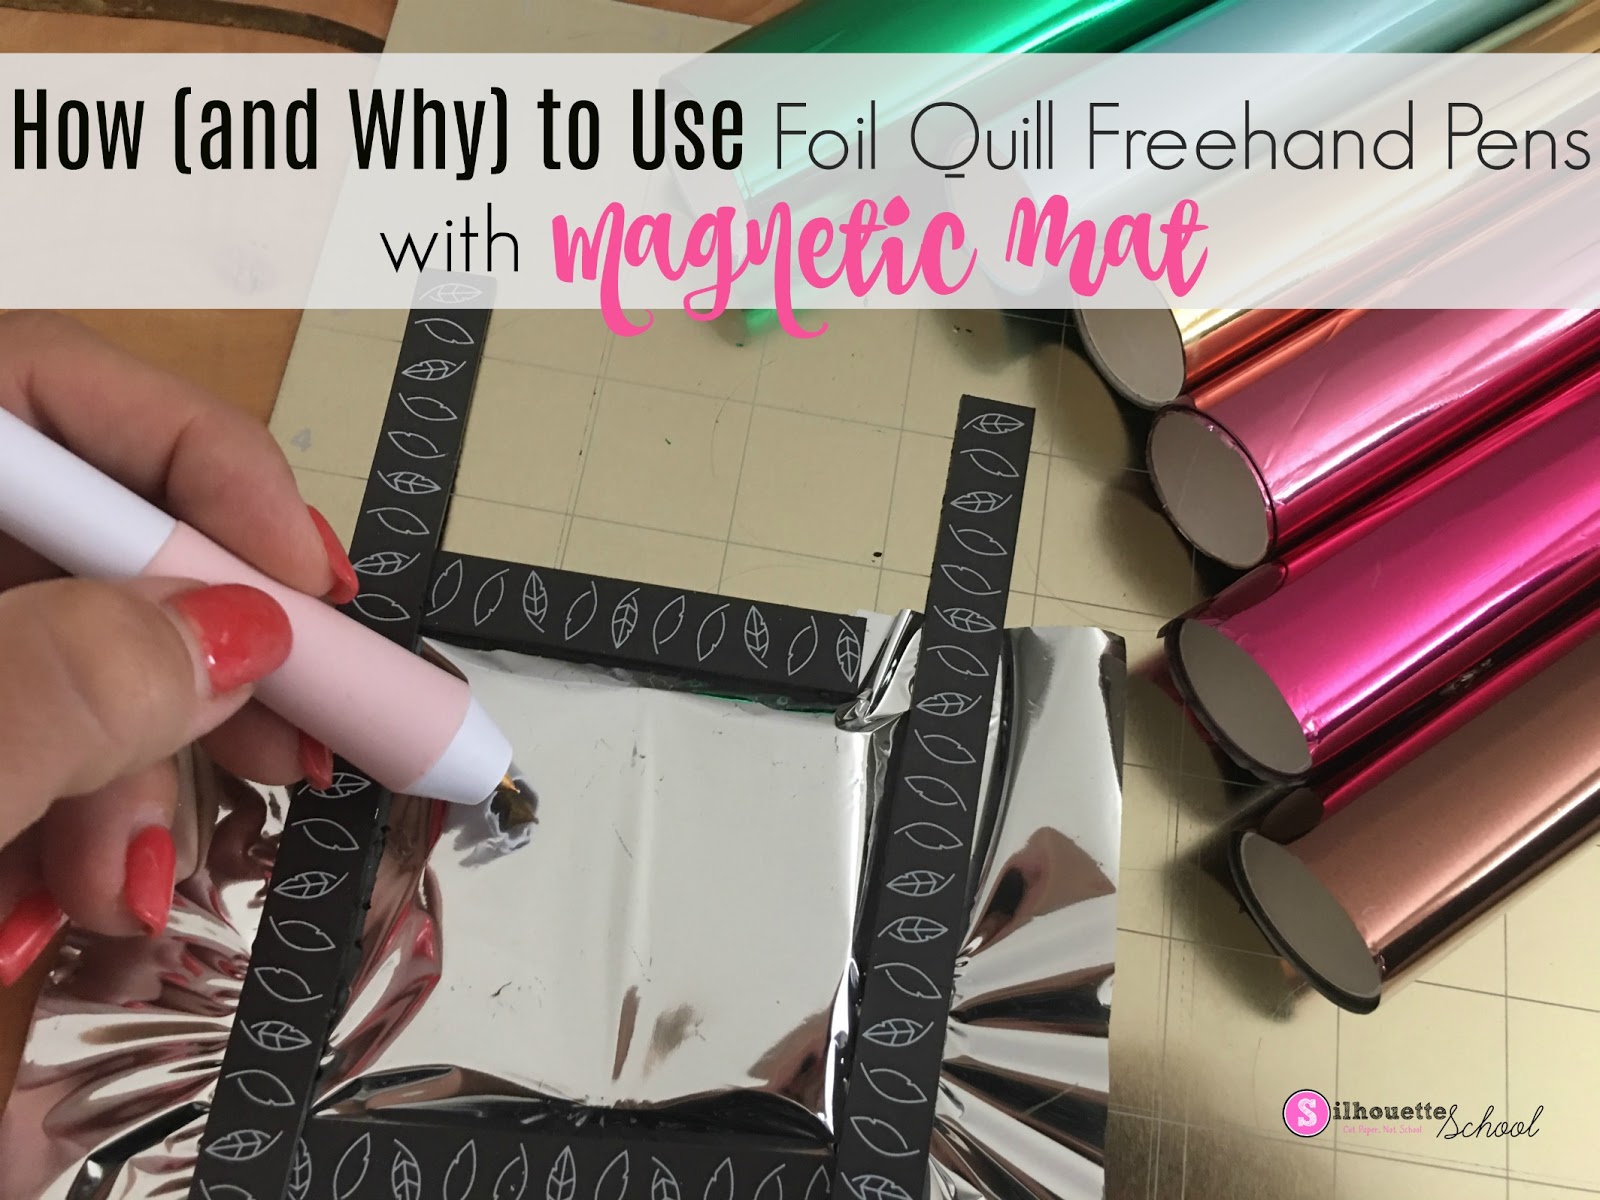 How to Use Foil Quill Freehand Pens and Magnetic Mat Together